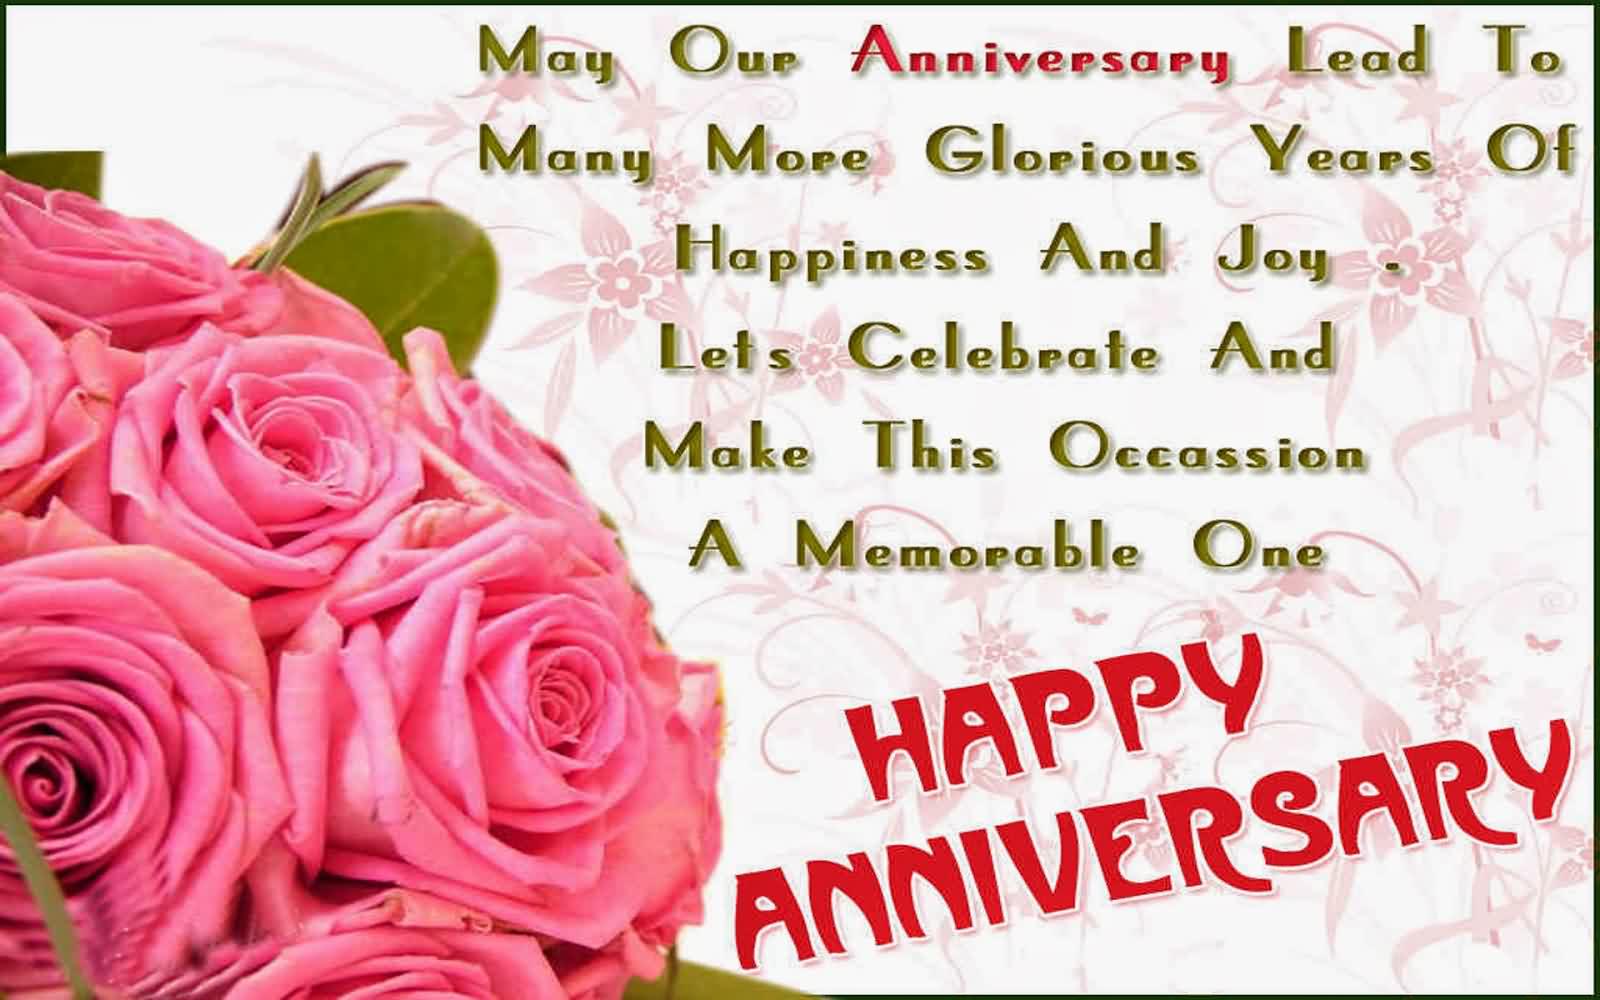 Beautiful Anniversary Card With Joy And Happiness